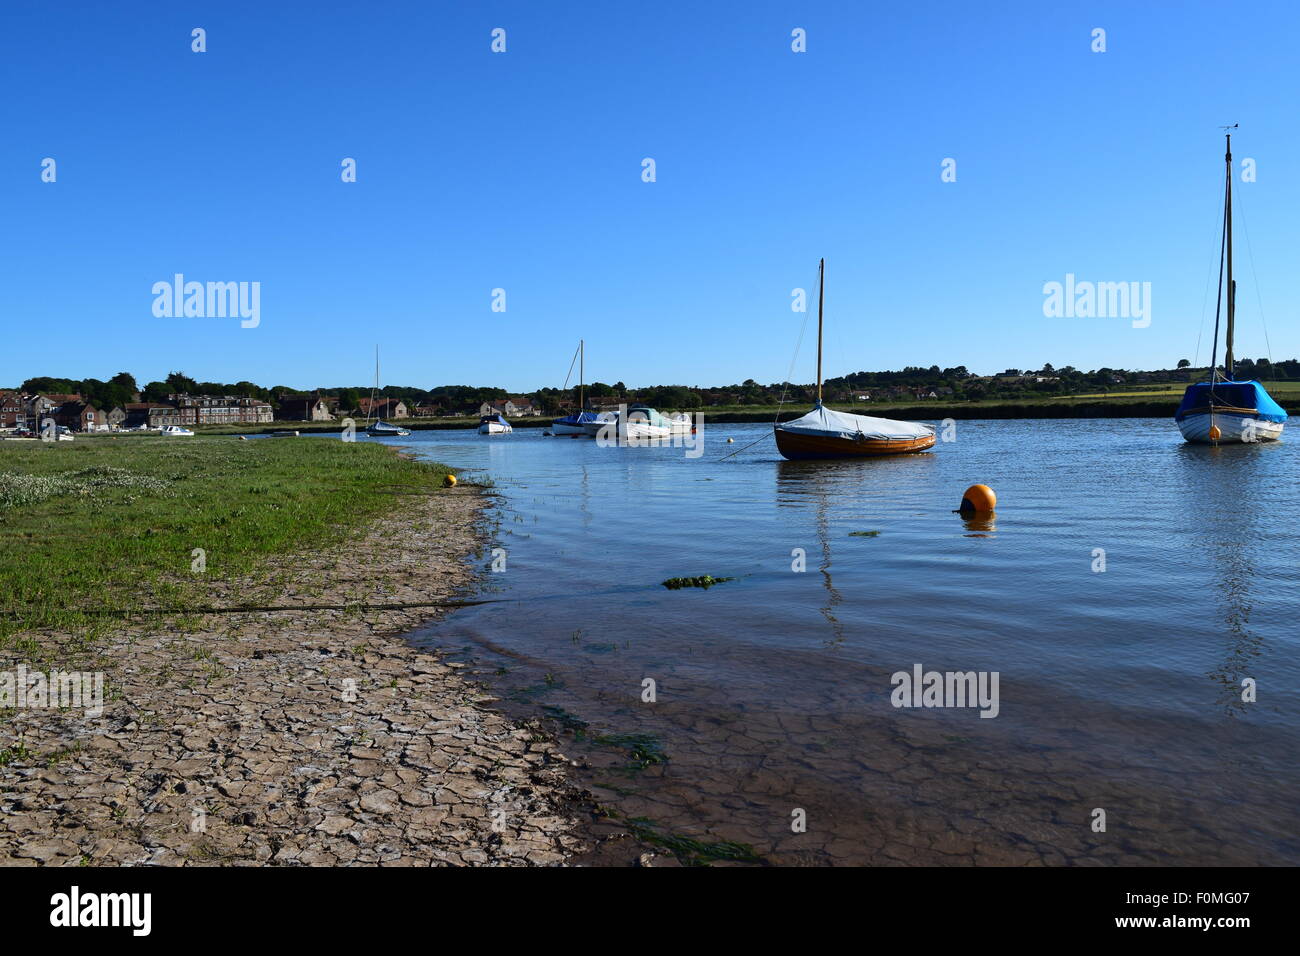 A View of Blakeney harbor at high tide. Stock Photo